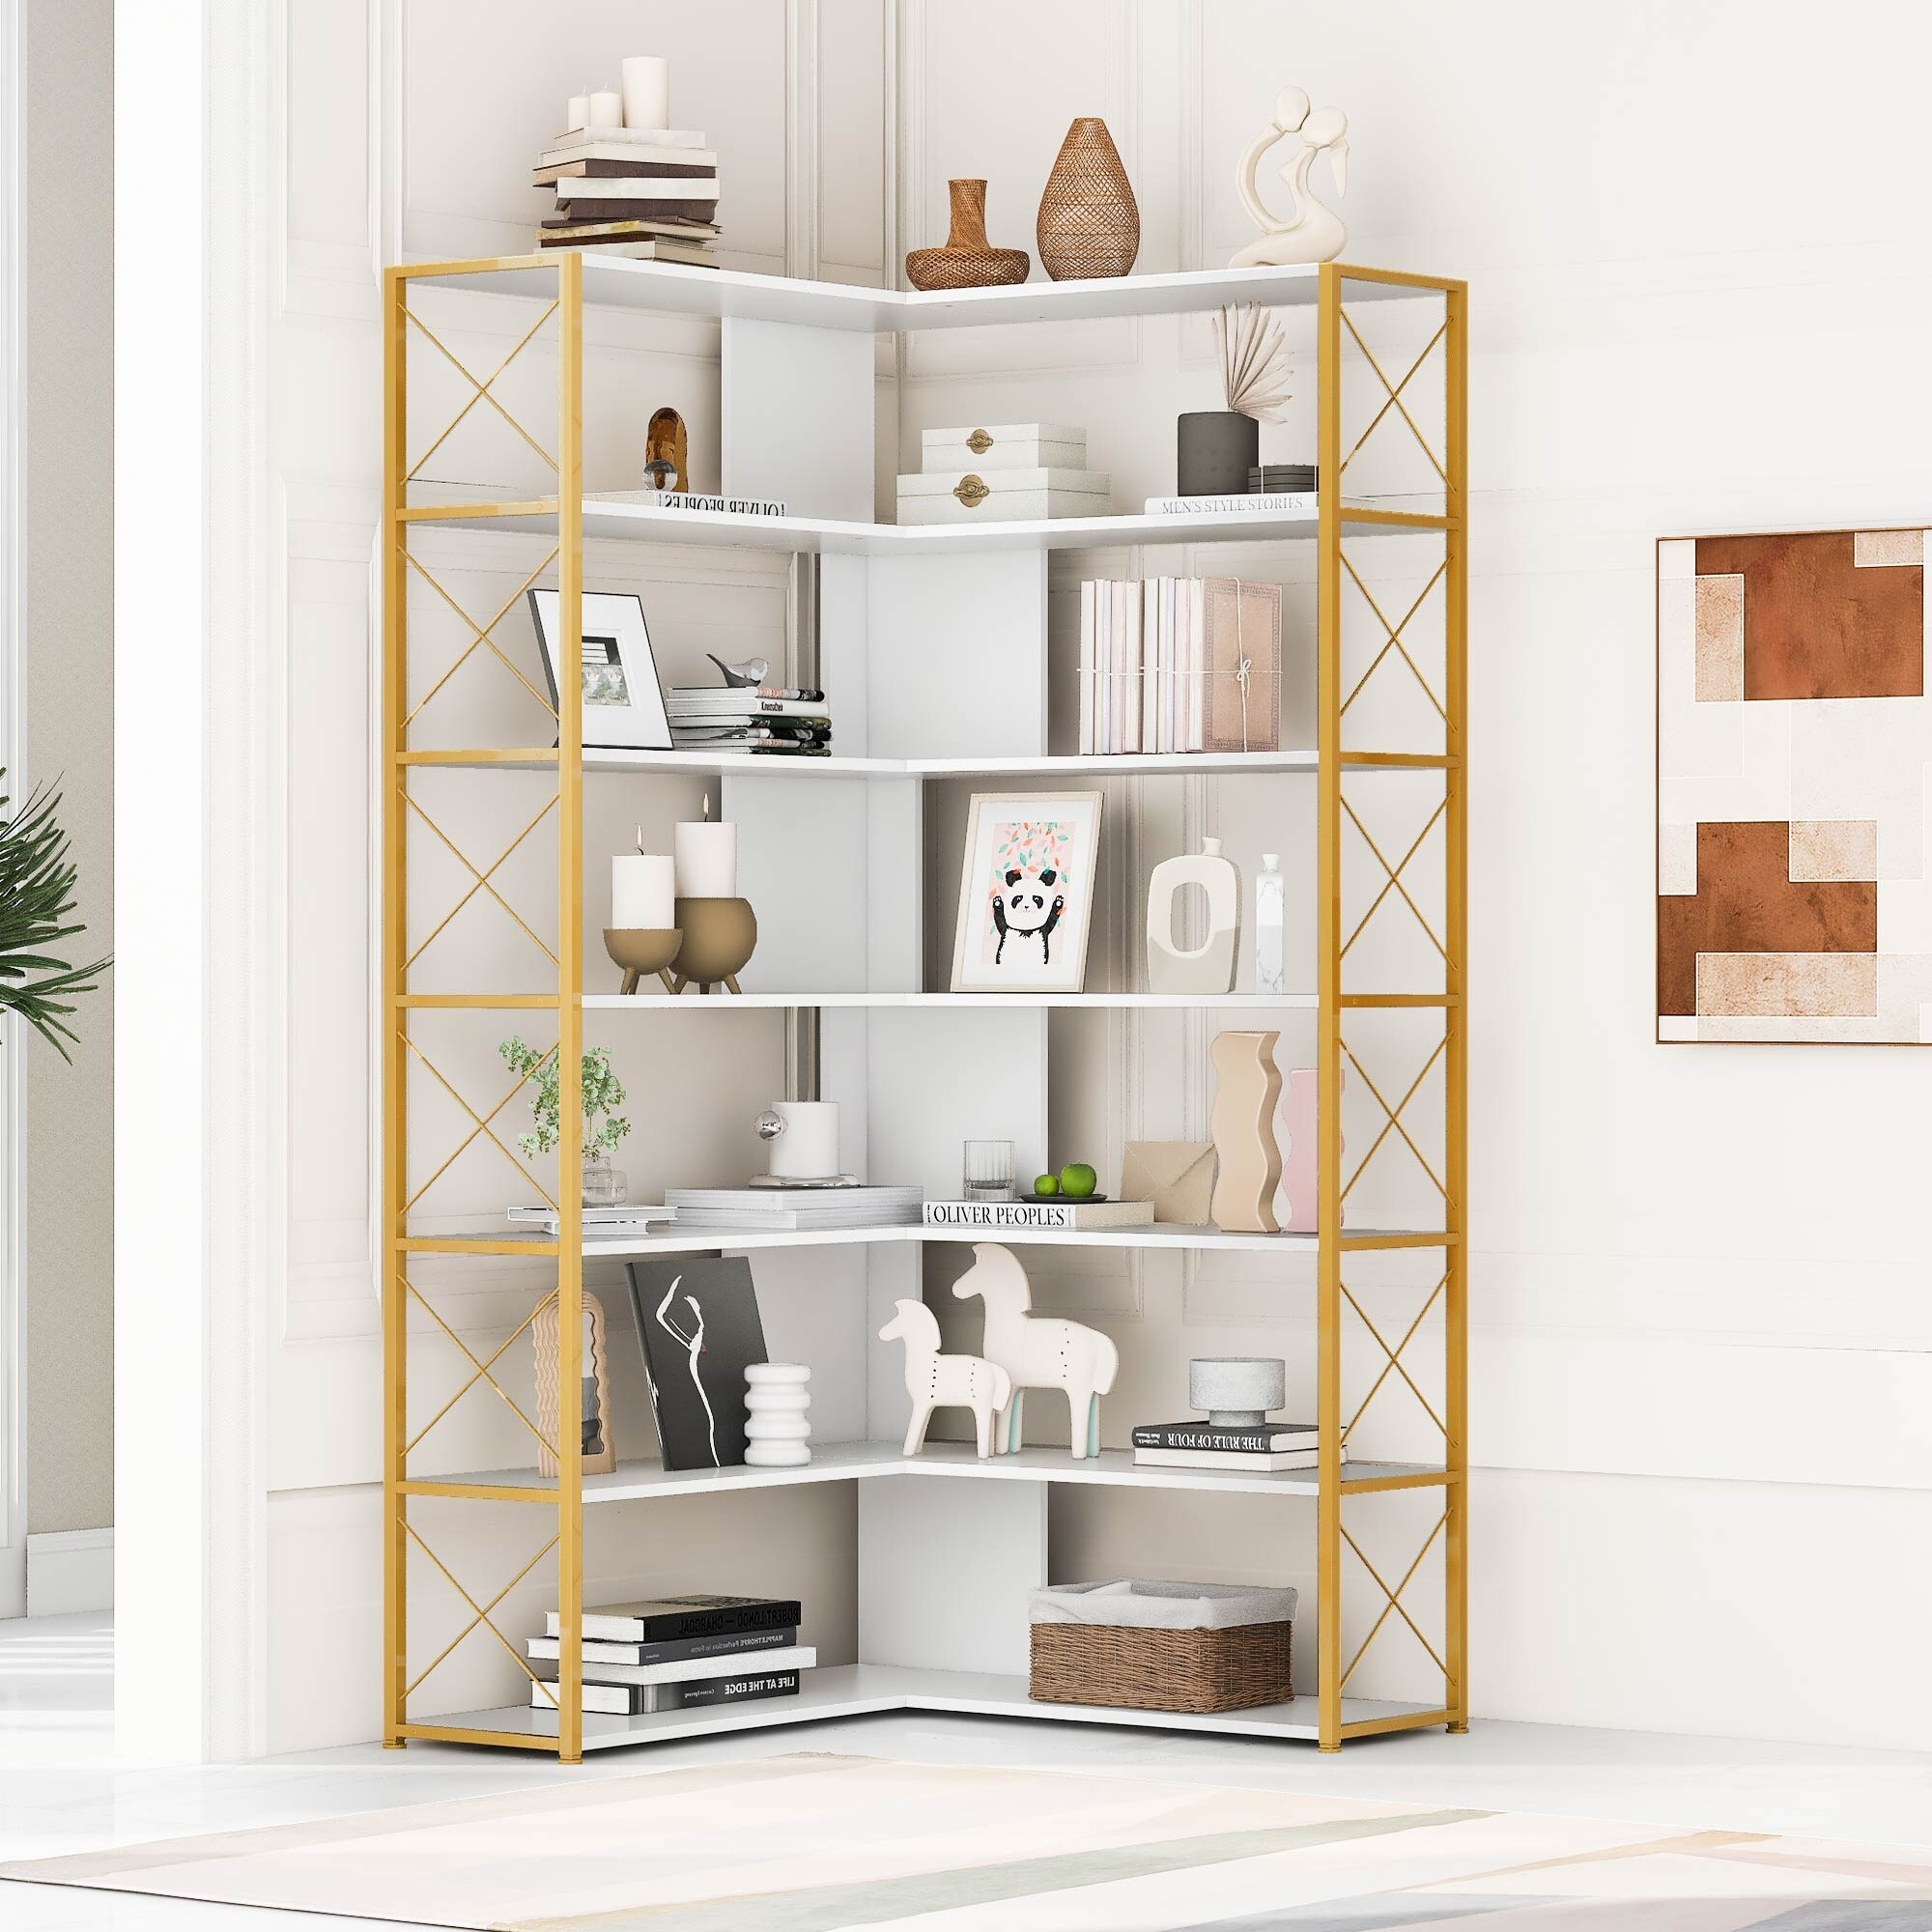 https://ak1.ostkcdn.com/images/products/is/images/direct/3bb3d8802b46d16c07a2a7980bc8d7d184542c71/7-Tier-Bookcase-Home-Office-Corner-Bookshelf%2C-L-Shaped-Display-Shelf-Plant-Stand%2C-Industrial-Style-Open-Storage-Shelf.jpg